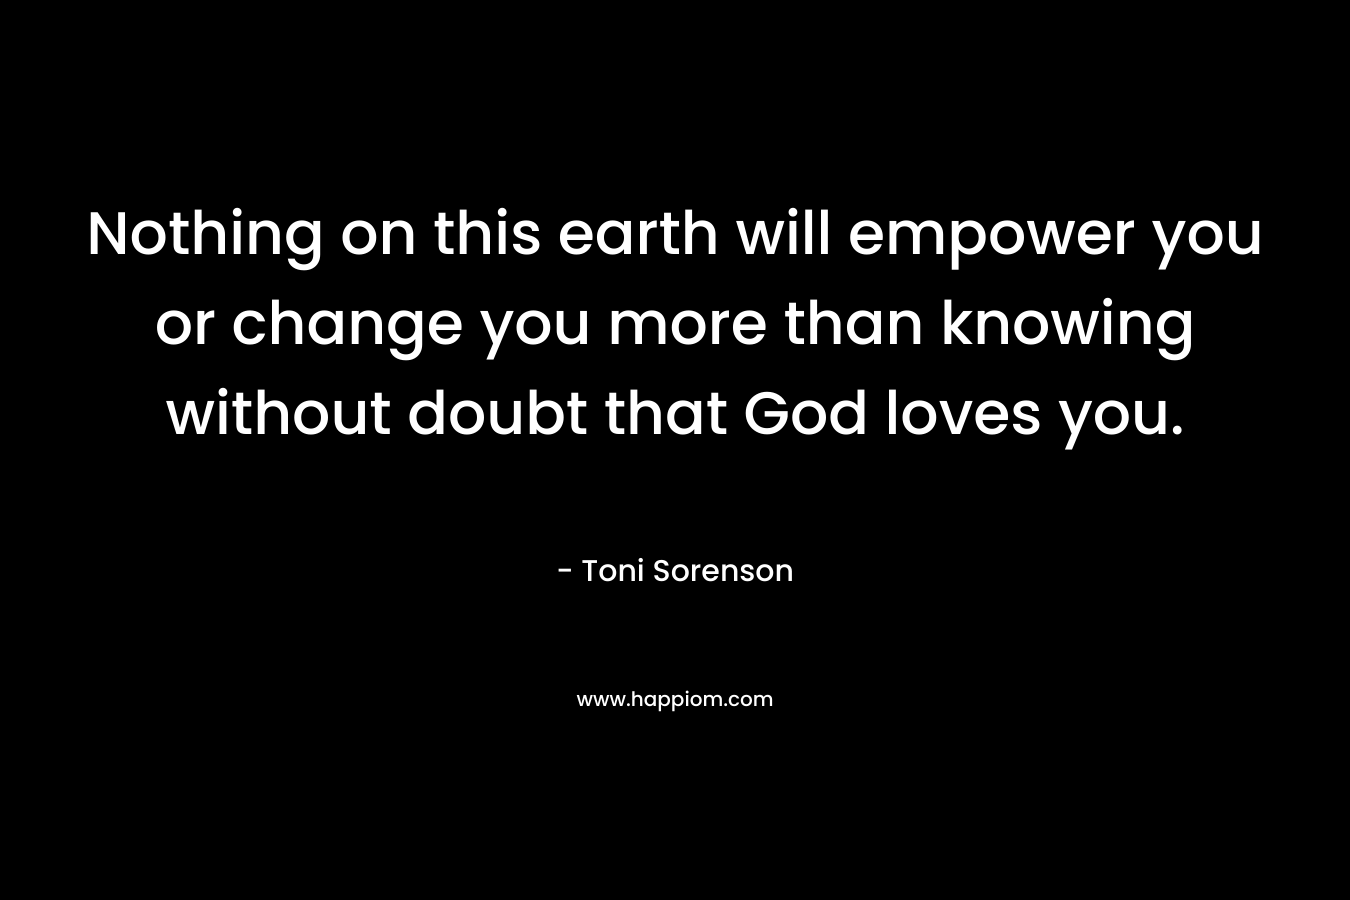 Nothing on this earth will empower you or change you more than knowing without doubt that God loves you.